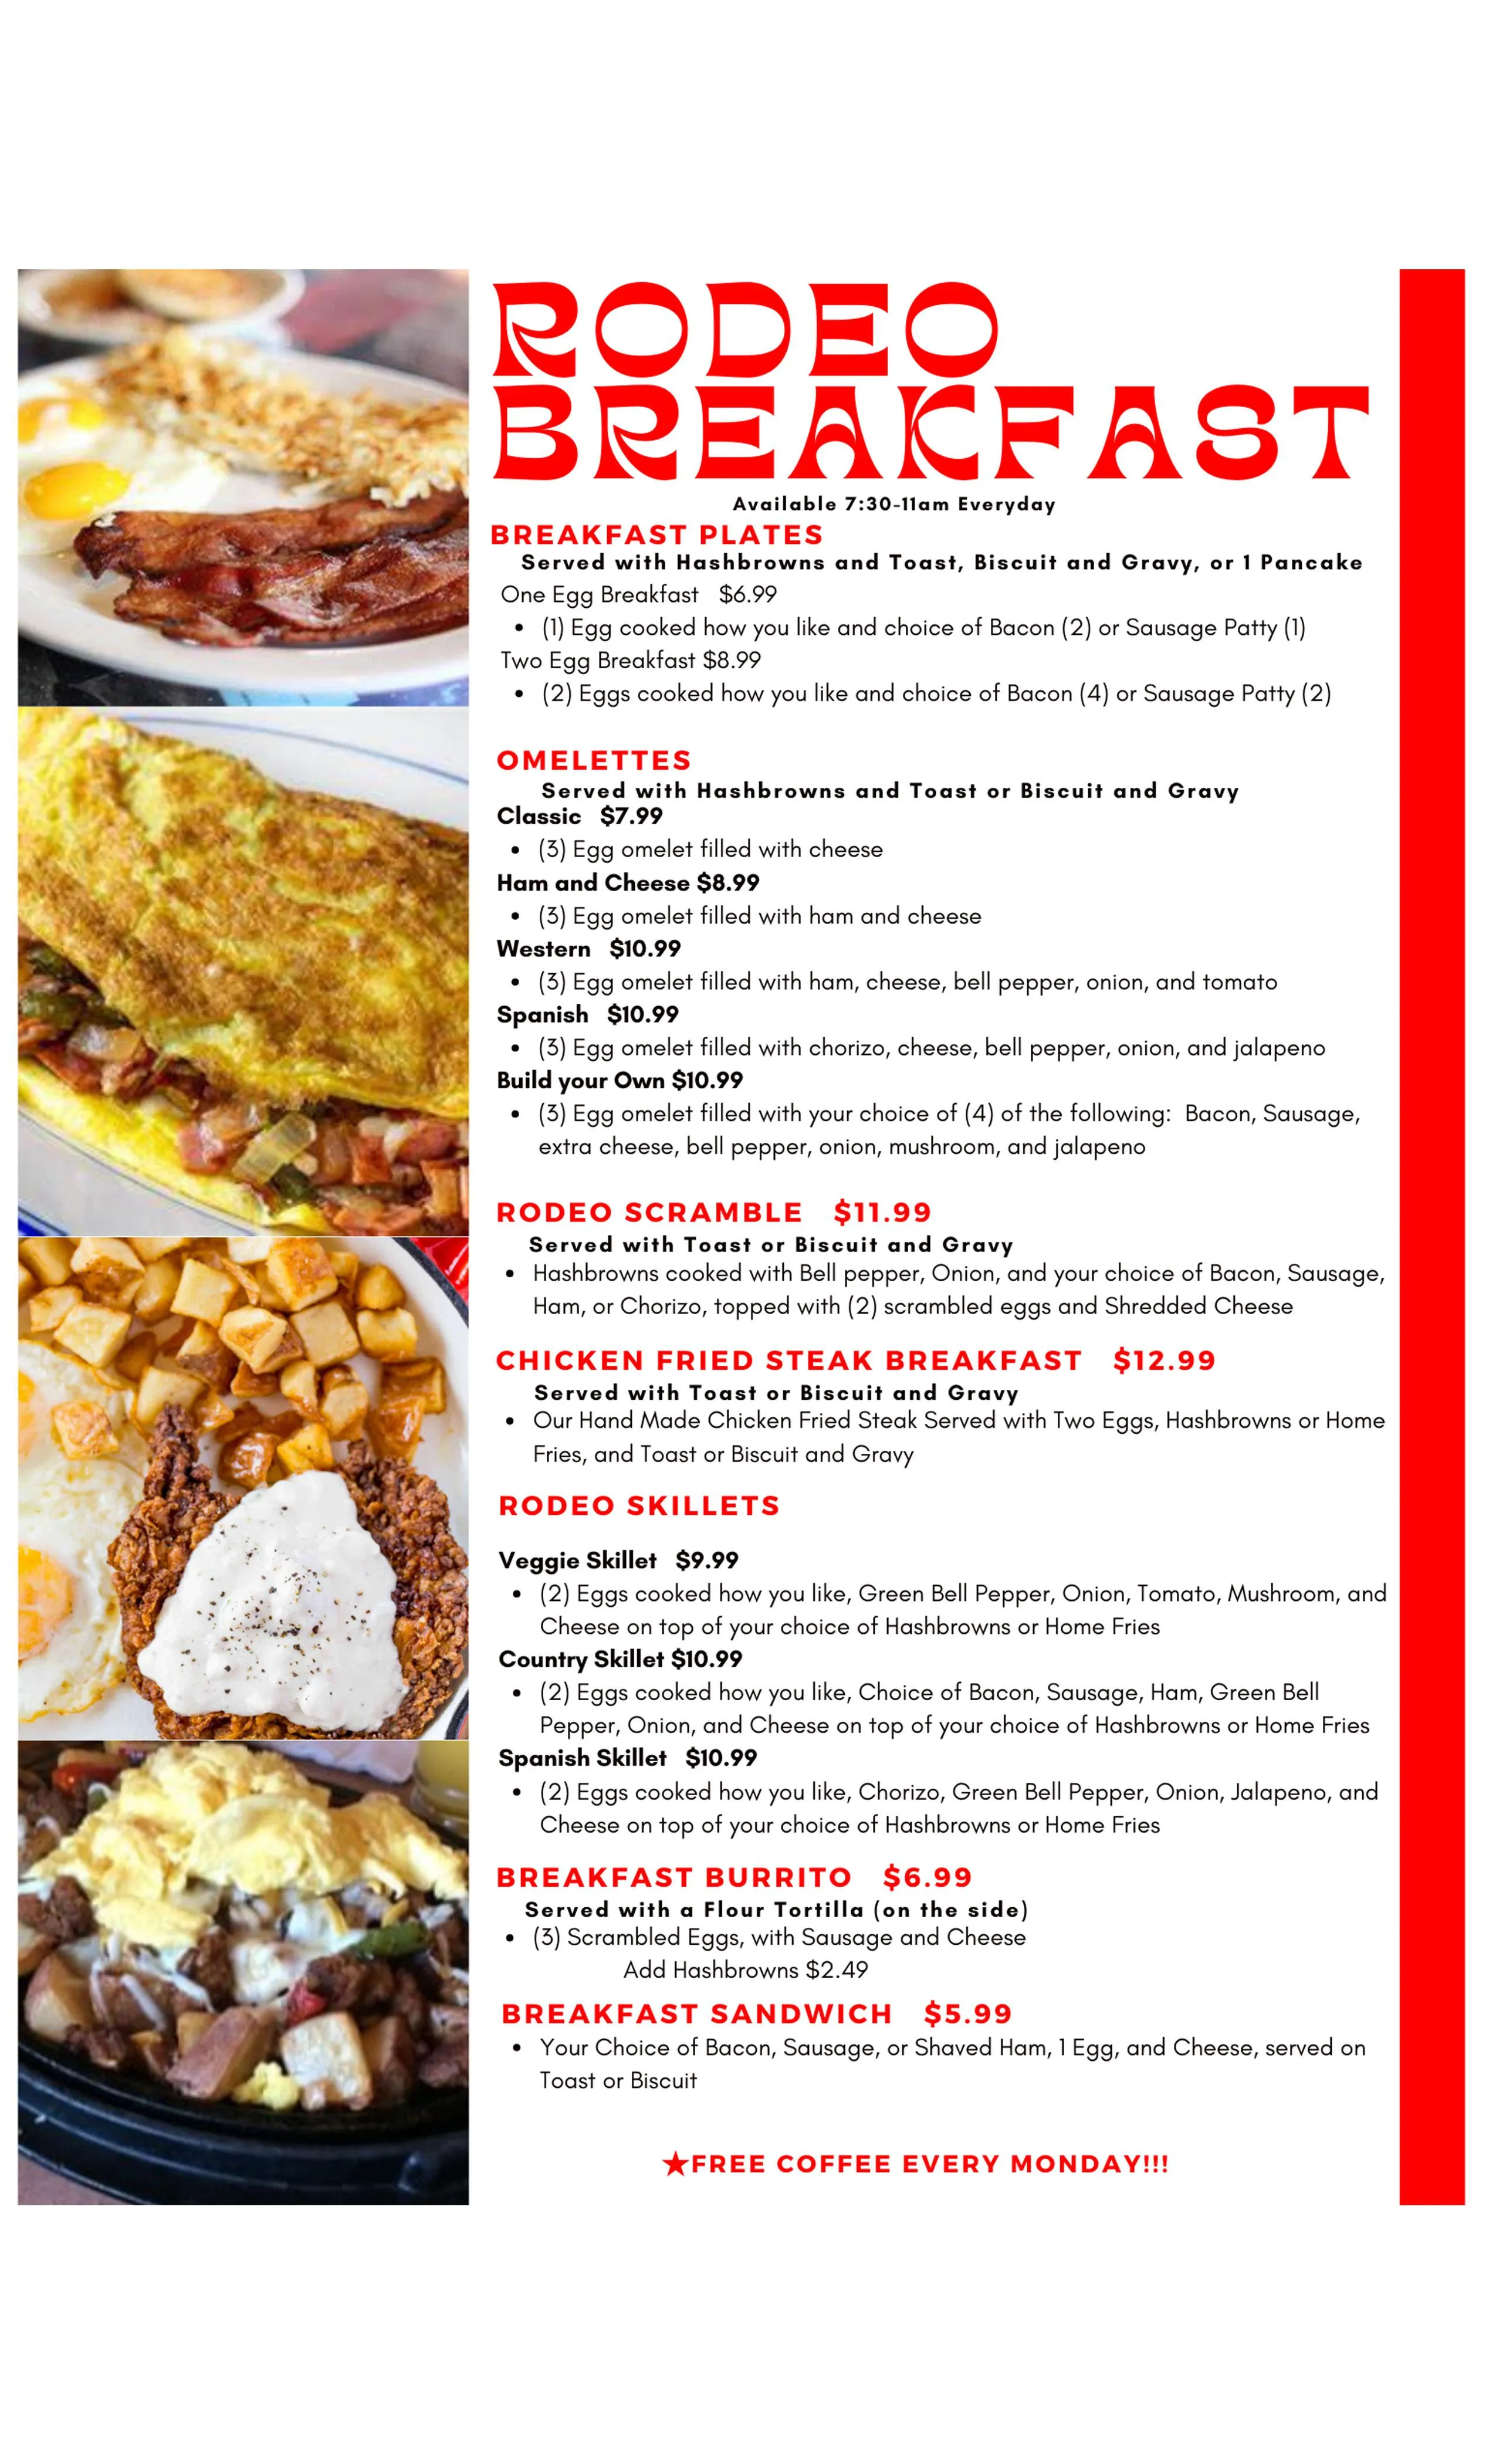 The Rodeo in Okmulgee breakfast menu page 1